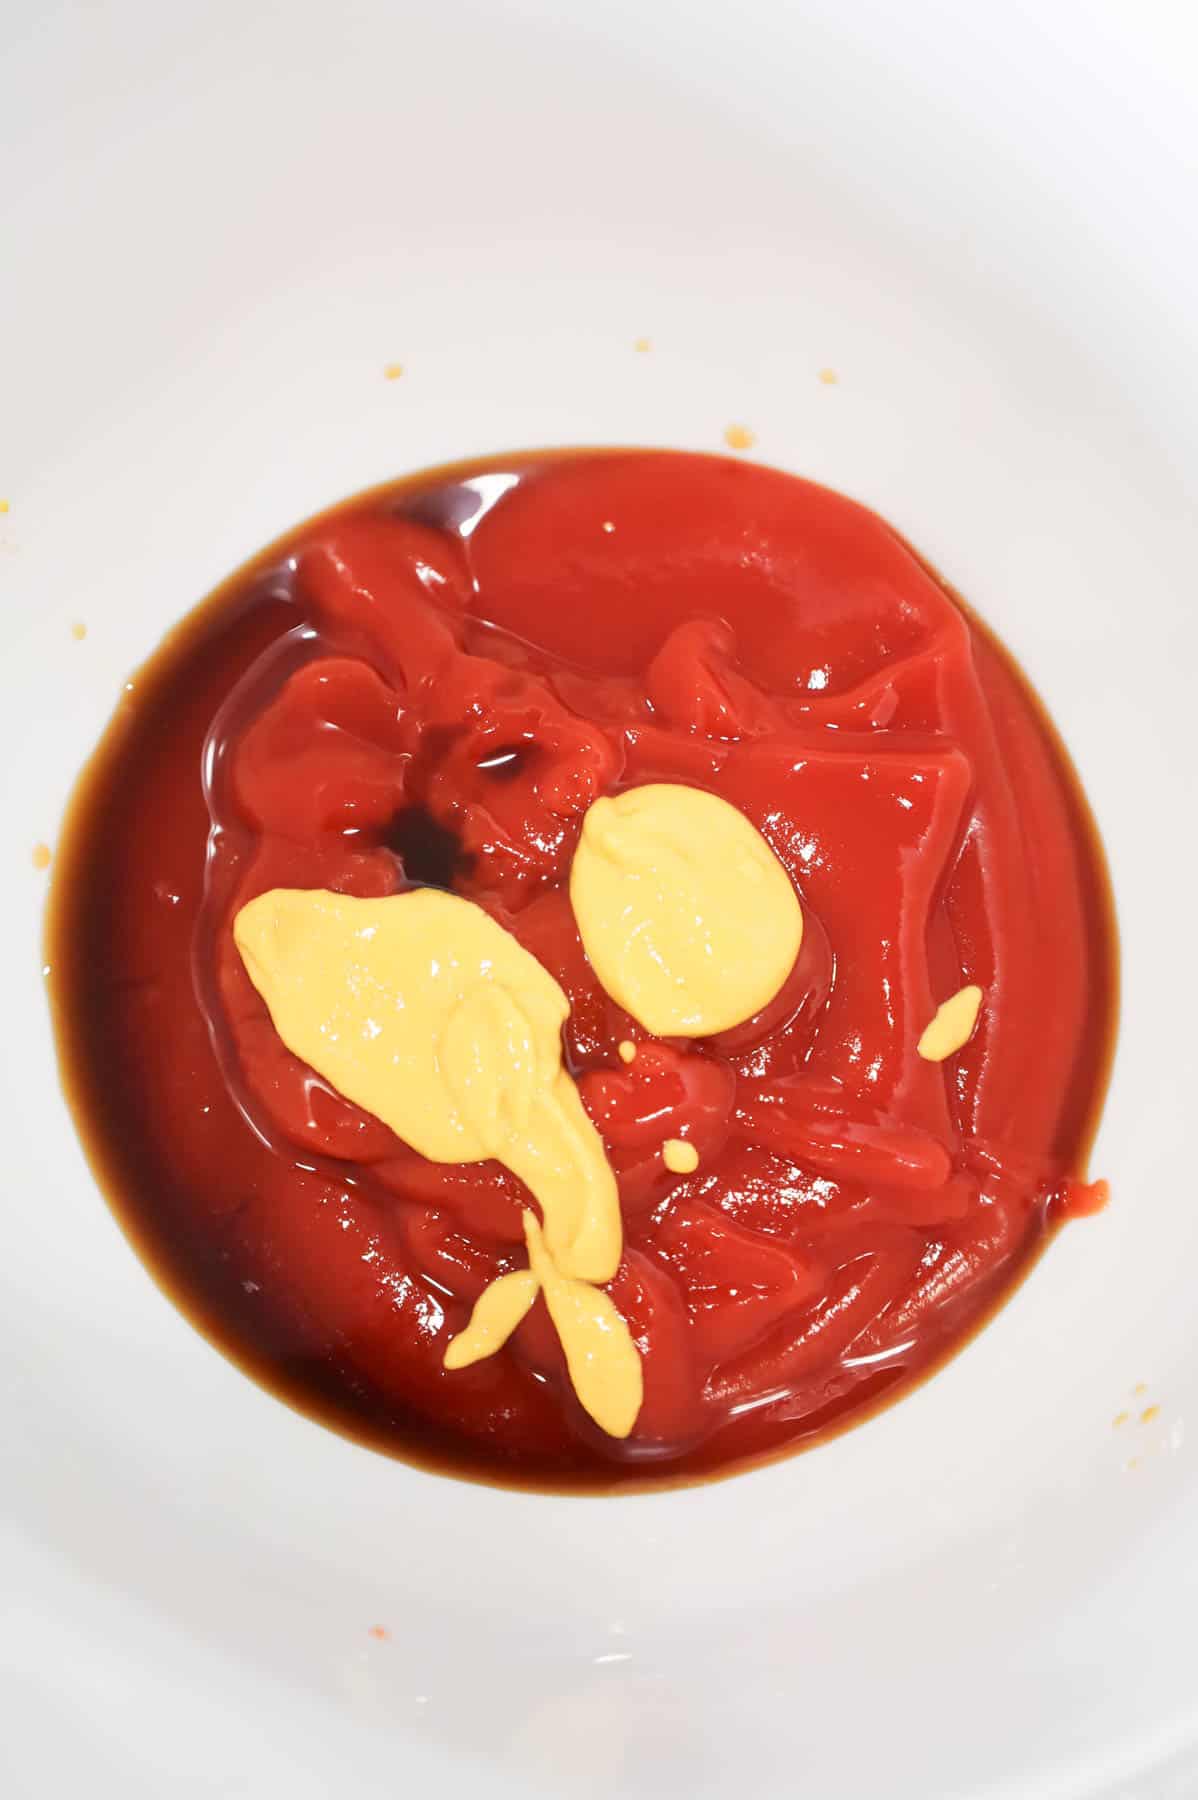 mustard and Worcestershire sauce on top of ketchup in a bowl